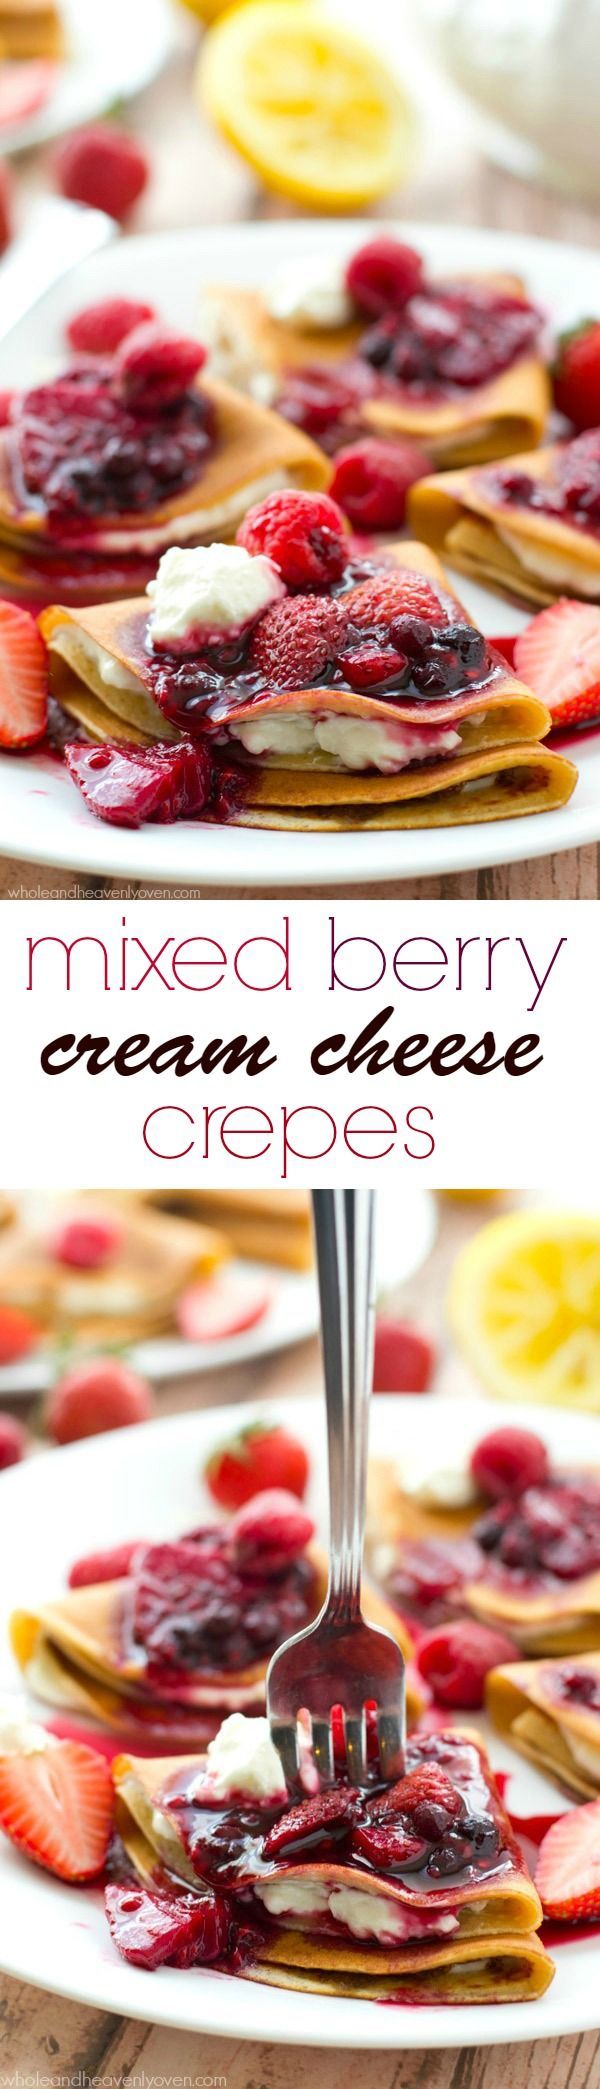 Filled with a tangy lemon cream cheese and topped with an unbelievable triple-berry sauce, these stunning crepes are a dream for